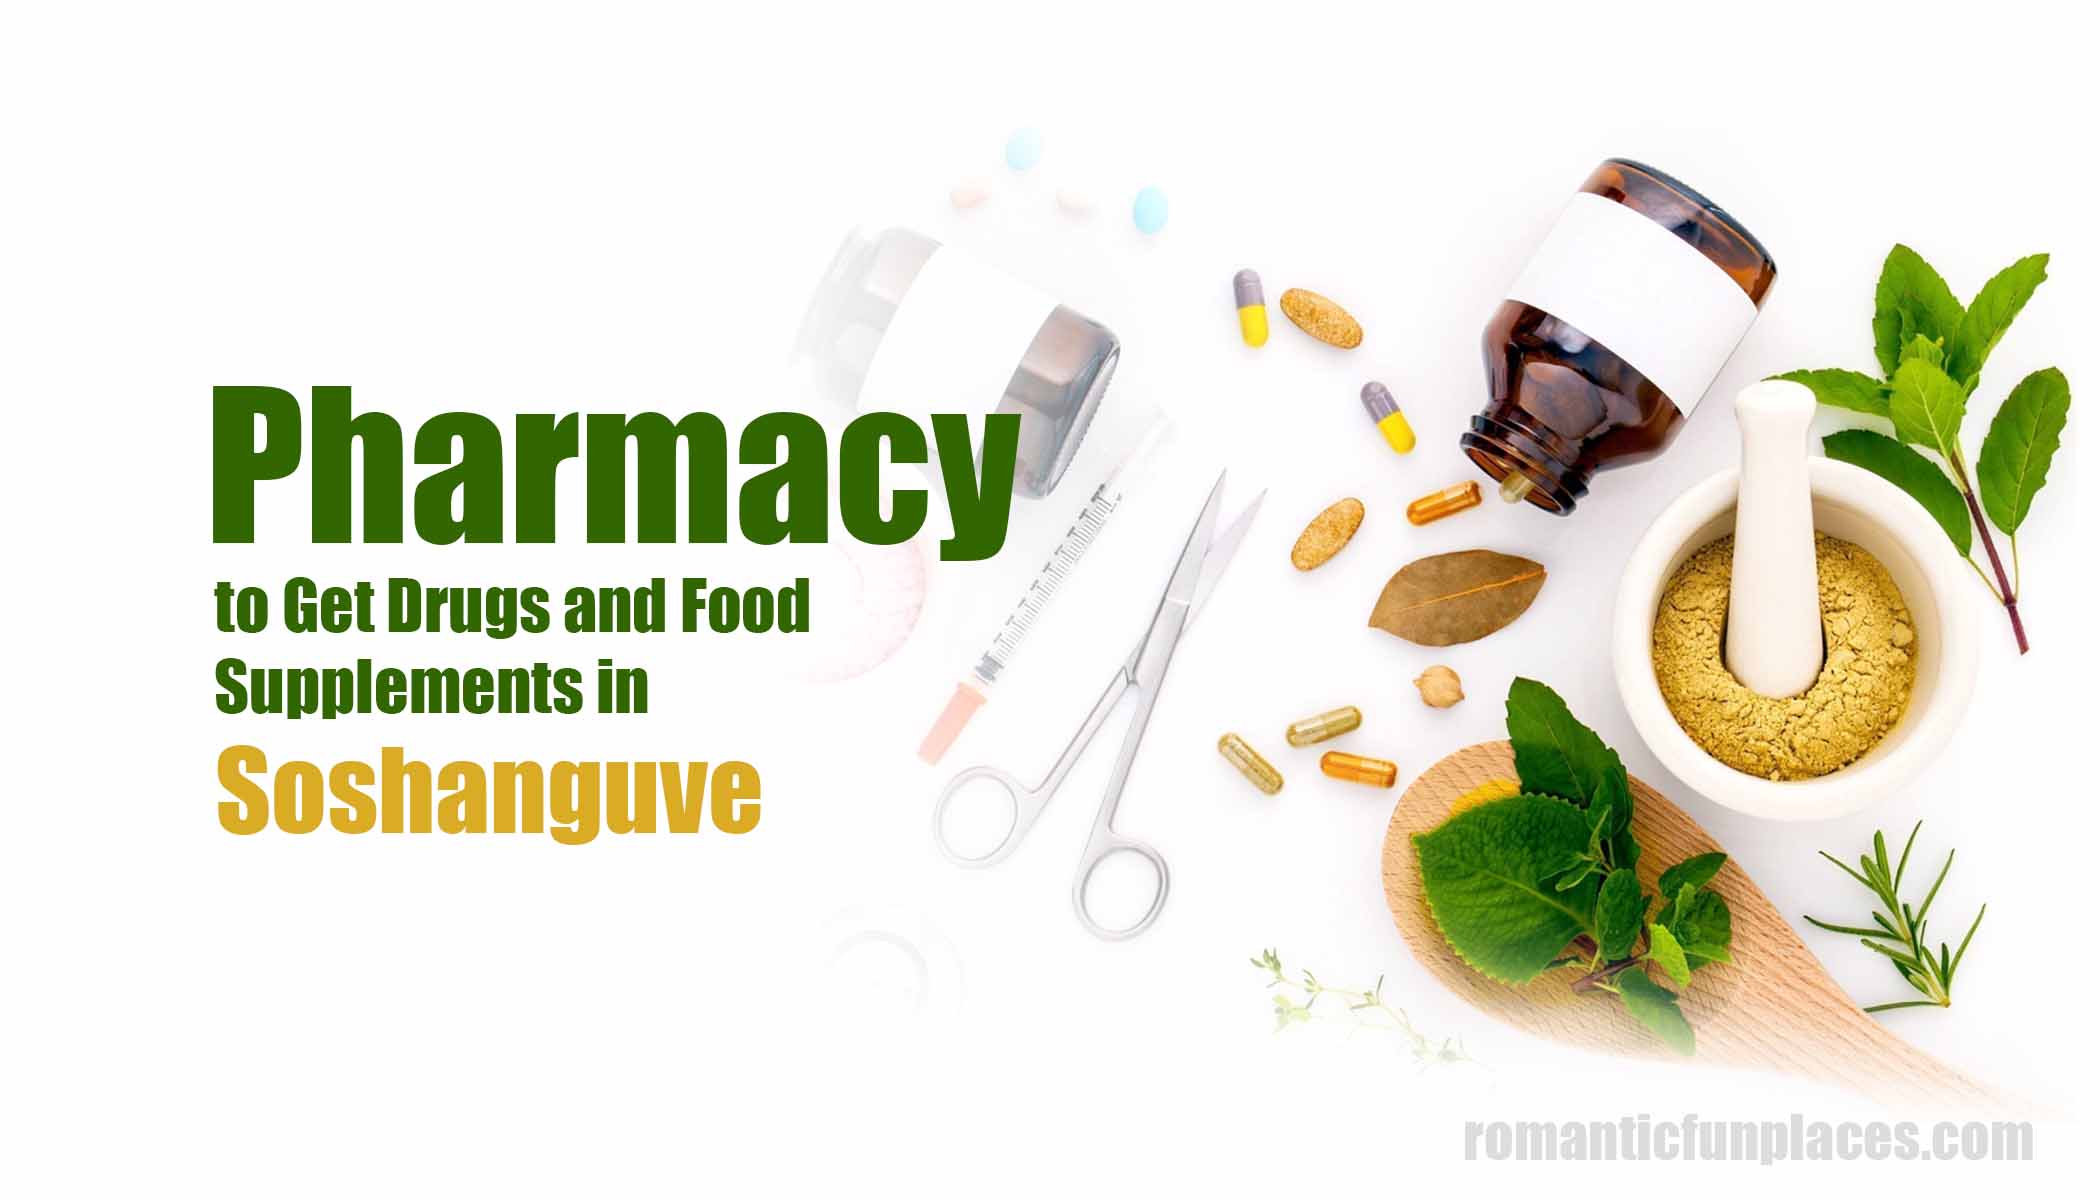 Pharmacy to Get Drugs and Food Supplements In Soshanguve